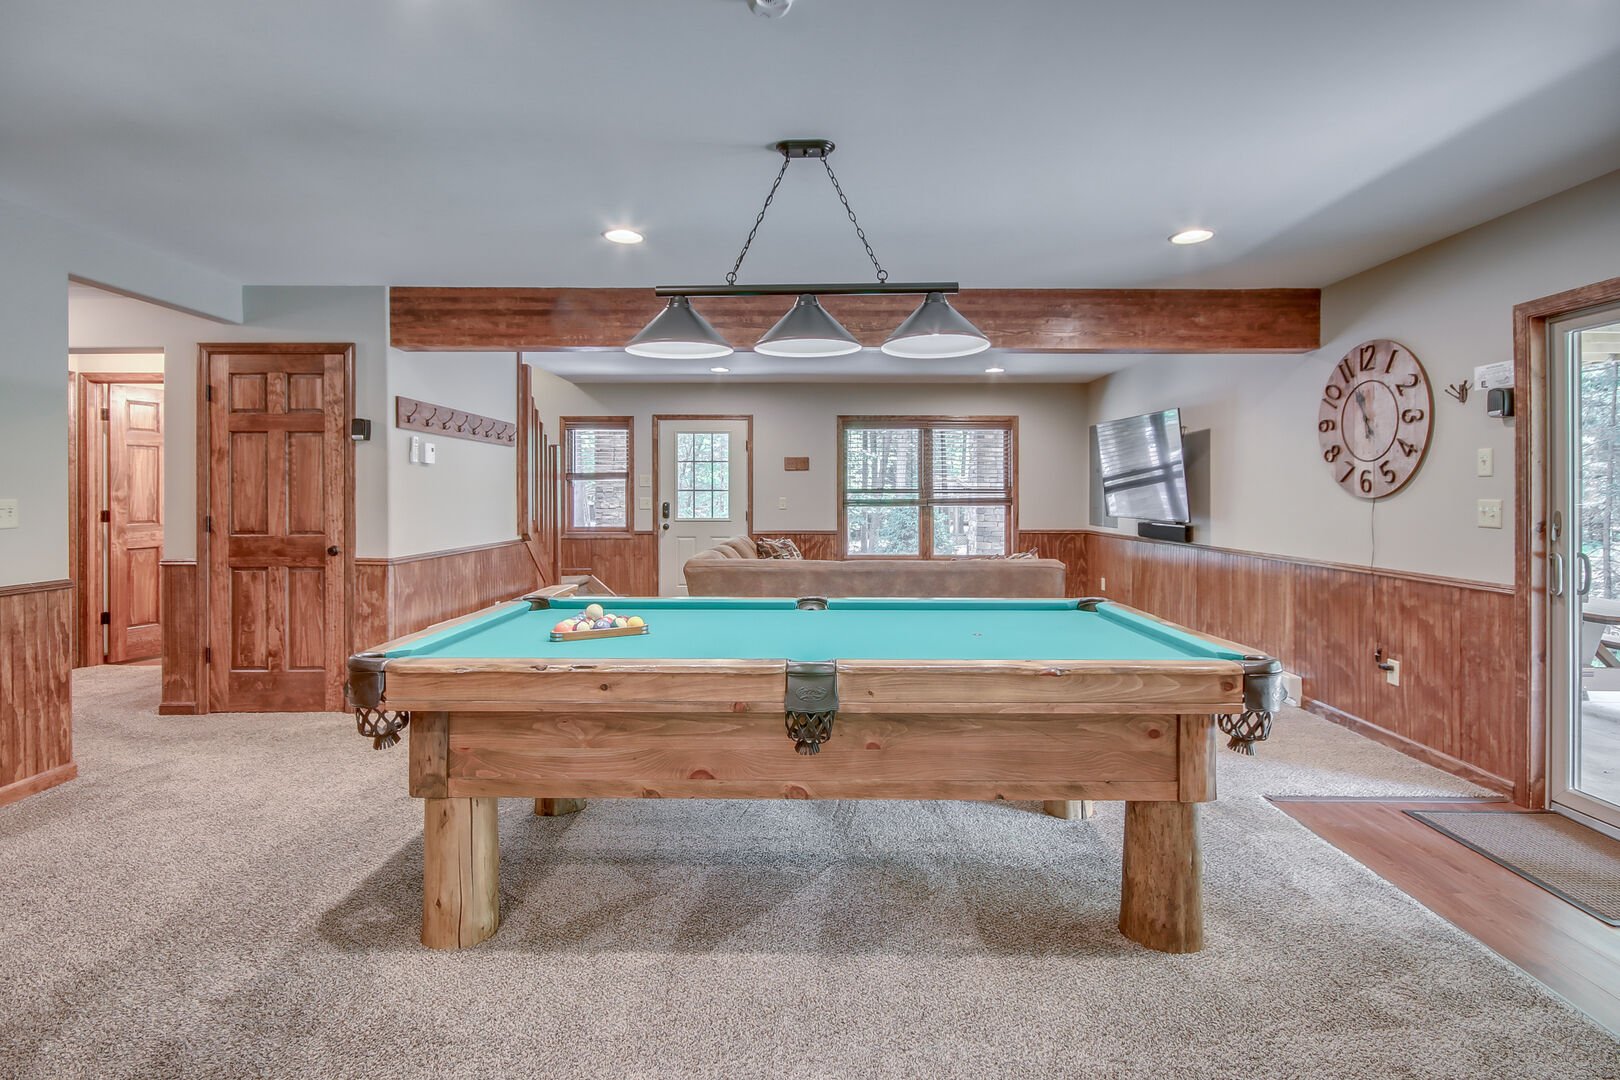 Game Room with Pool Table in our Poconos Vacation Home Rental